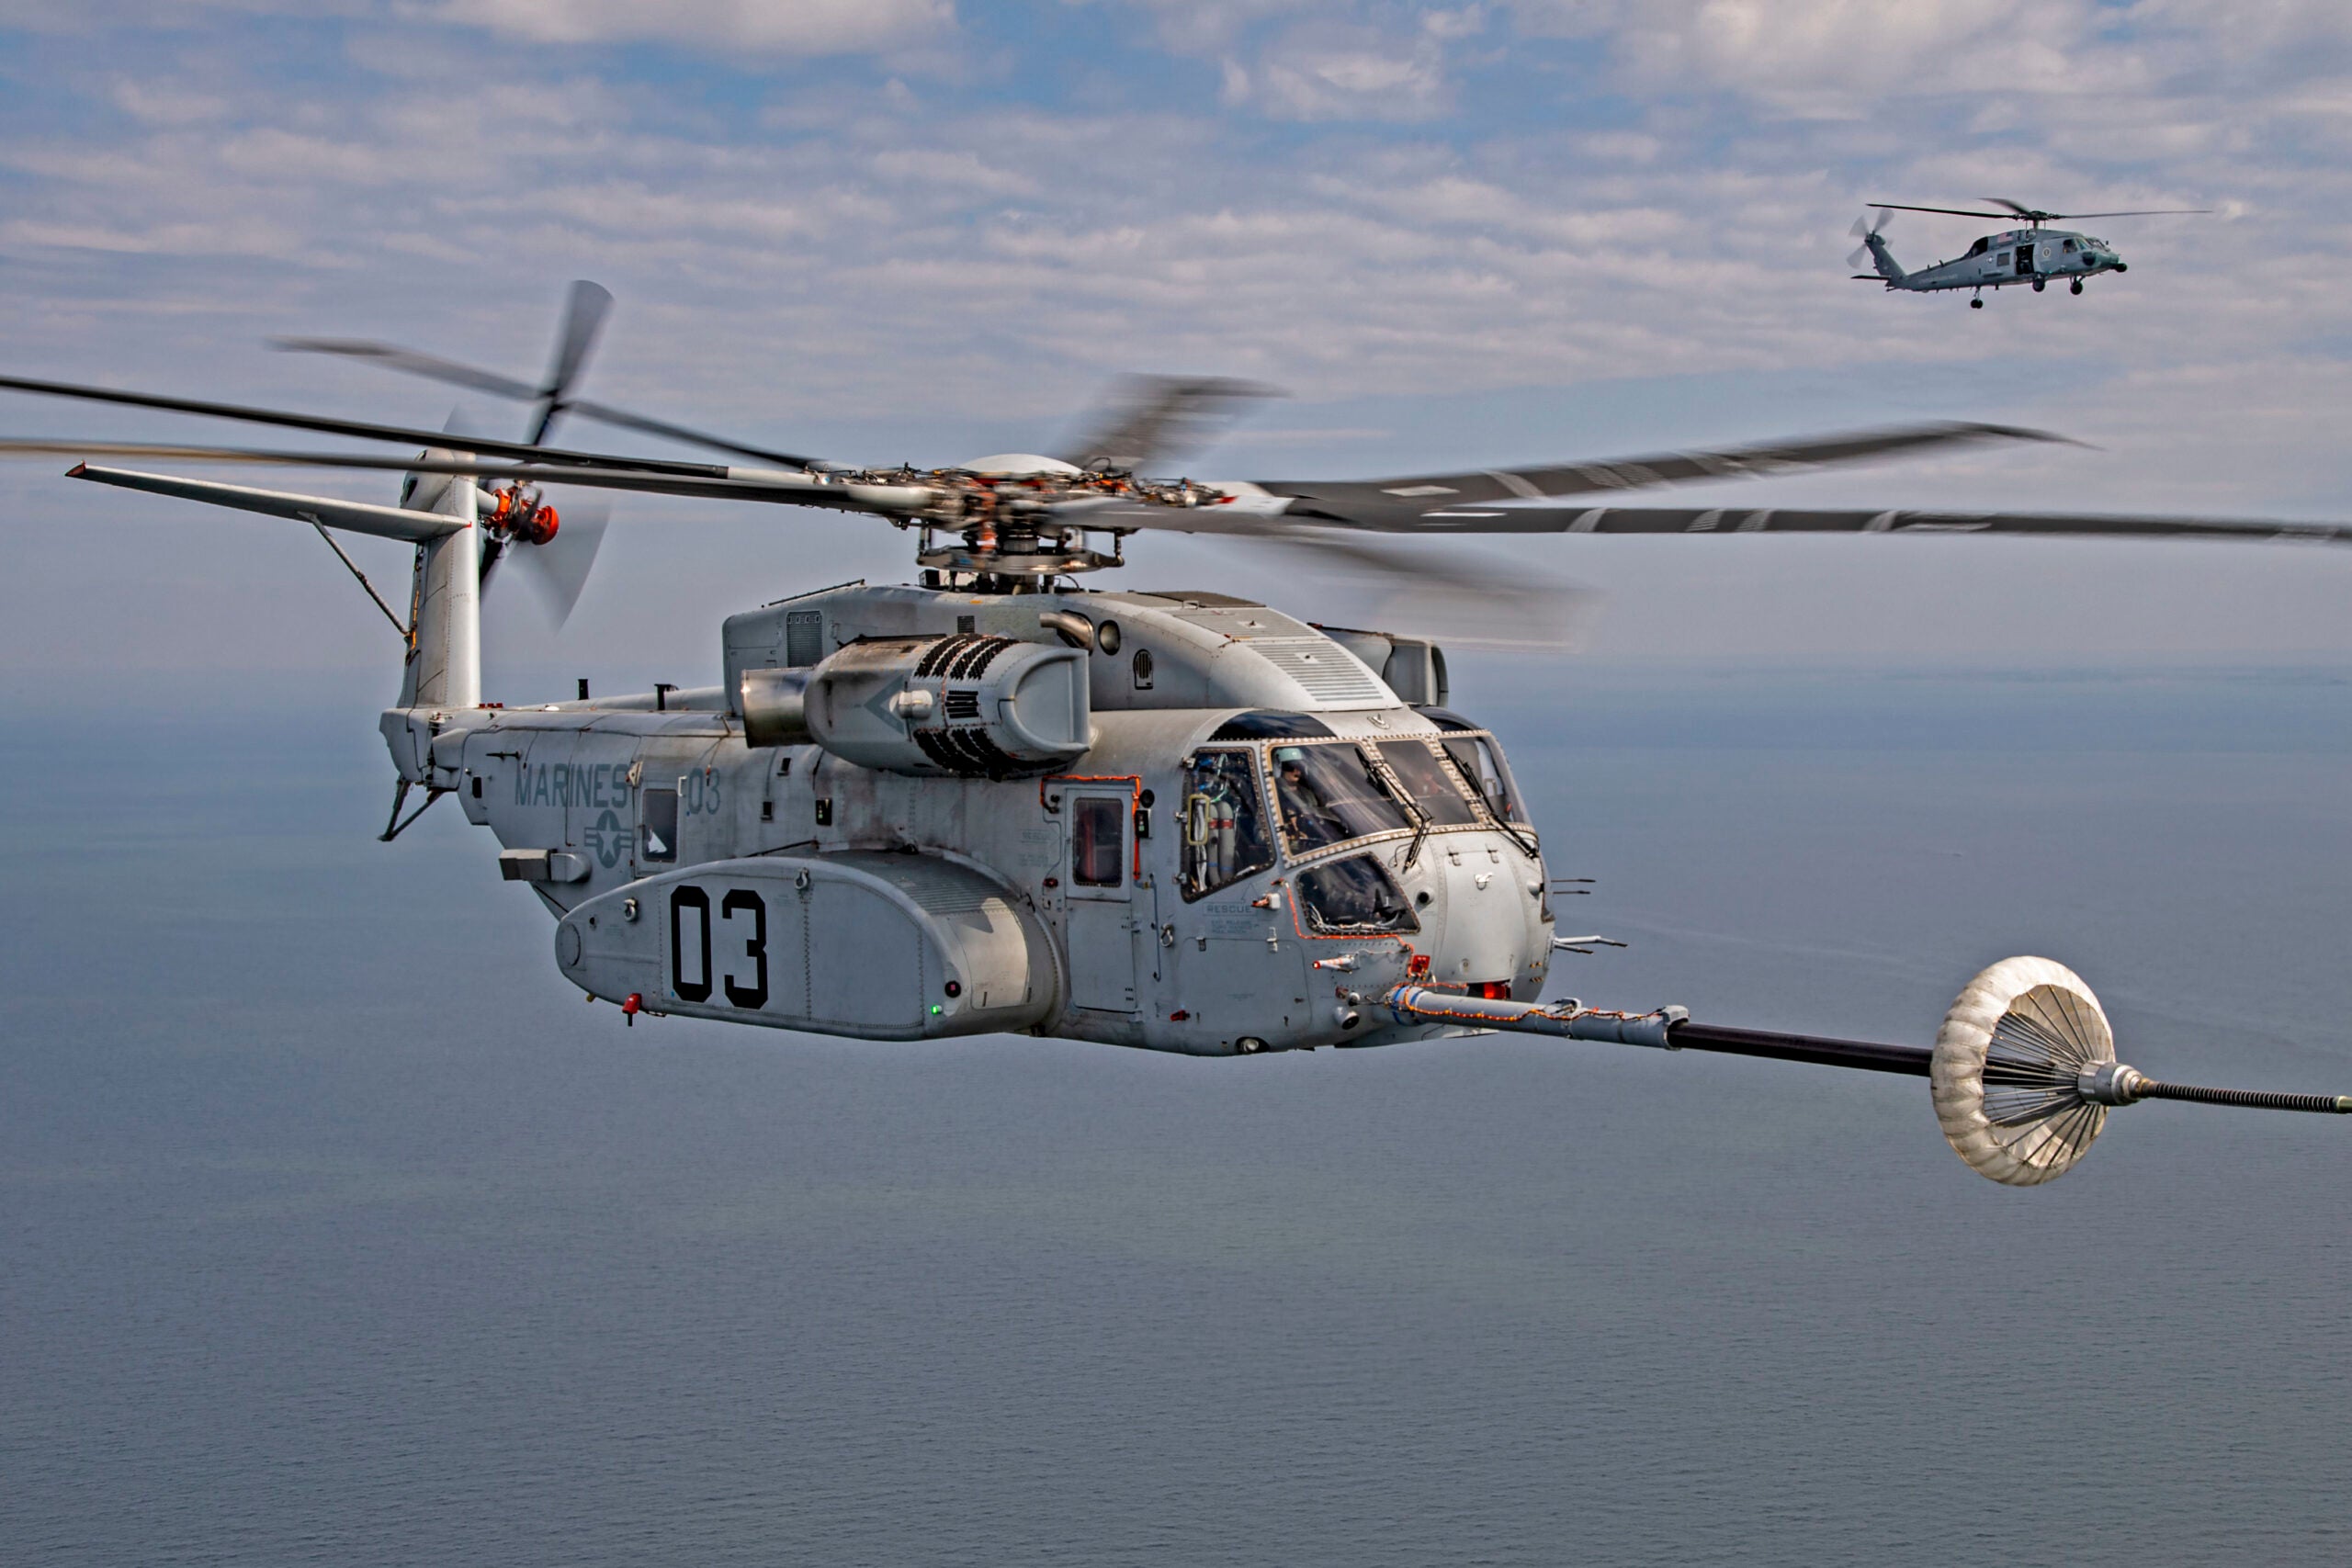 The CH-53K King Stallion successfully plugs into a funnel-shaped drogue towed behind a KC-130J during aerial refueling wake testing over the Chesapeake Bay. Photo by Erik Hildebrandt.